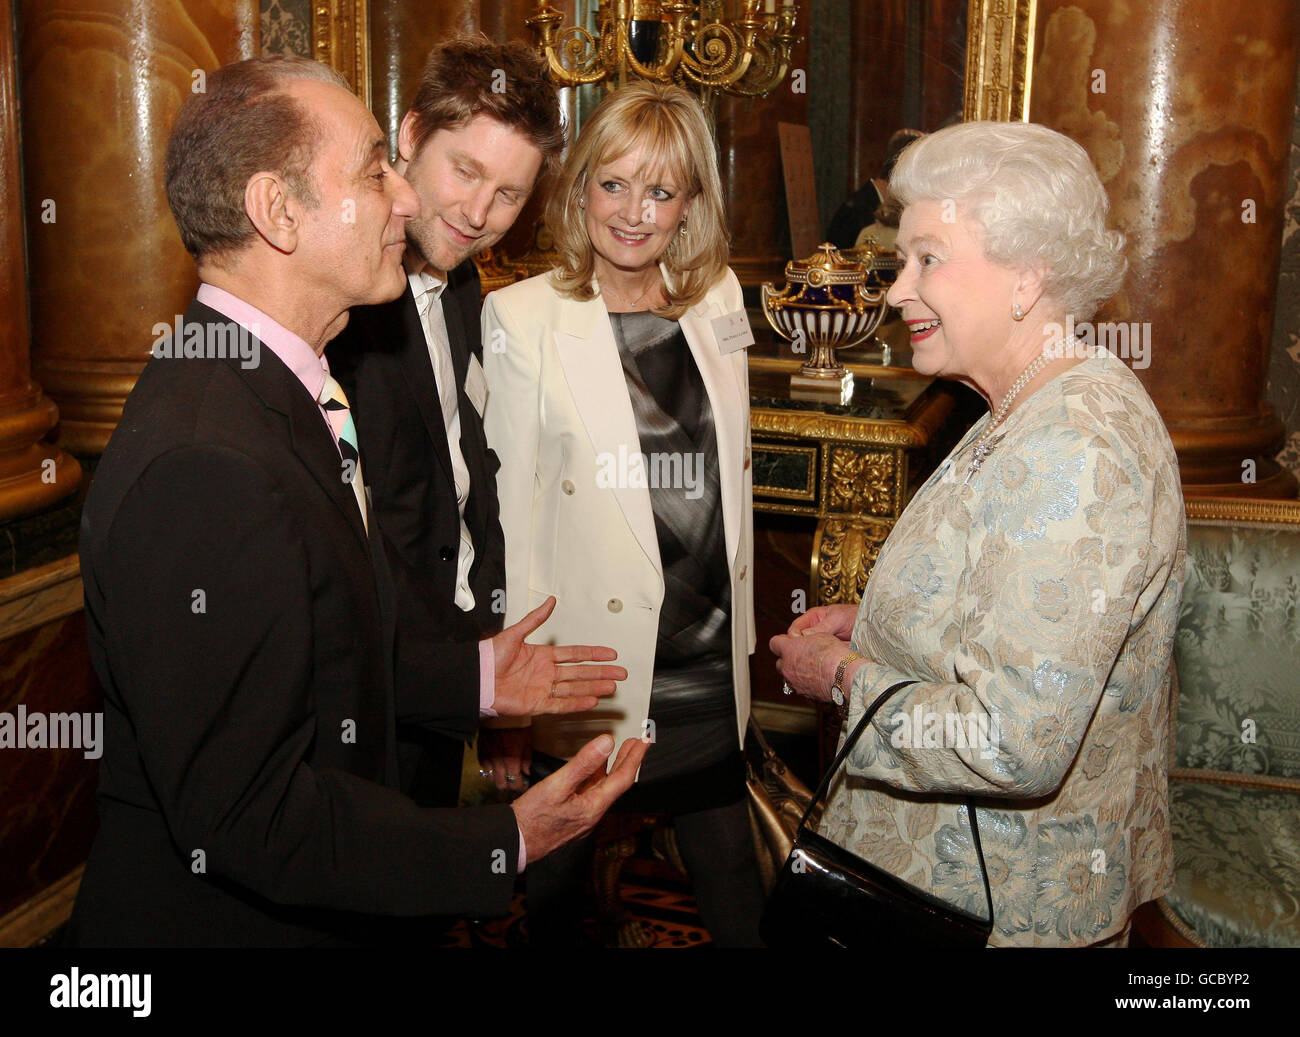 Queen Elizabeth II speaks to (left to right) David Sassoon, Christopher Bailey from Burberry, and model Twiggy at a reception for the British Clothing Industry, including an exhibition of contemporary clothing curated by the Victoria and Albert Museum, at Buckingham Palace, London. Stock Photo